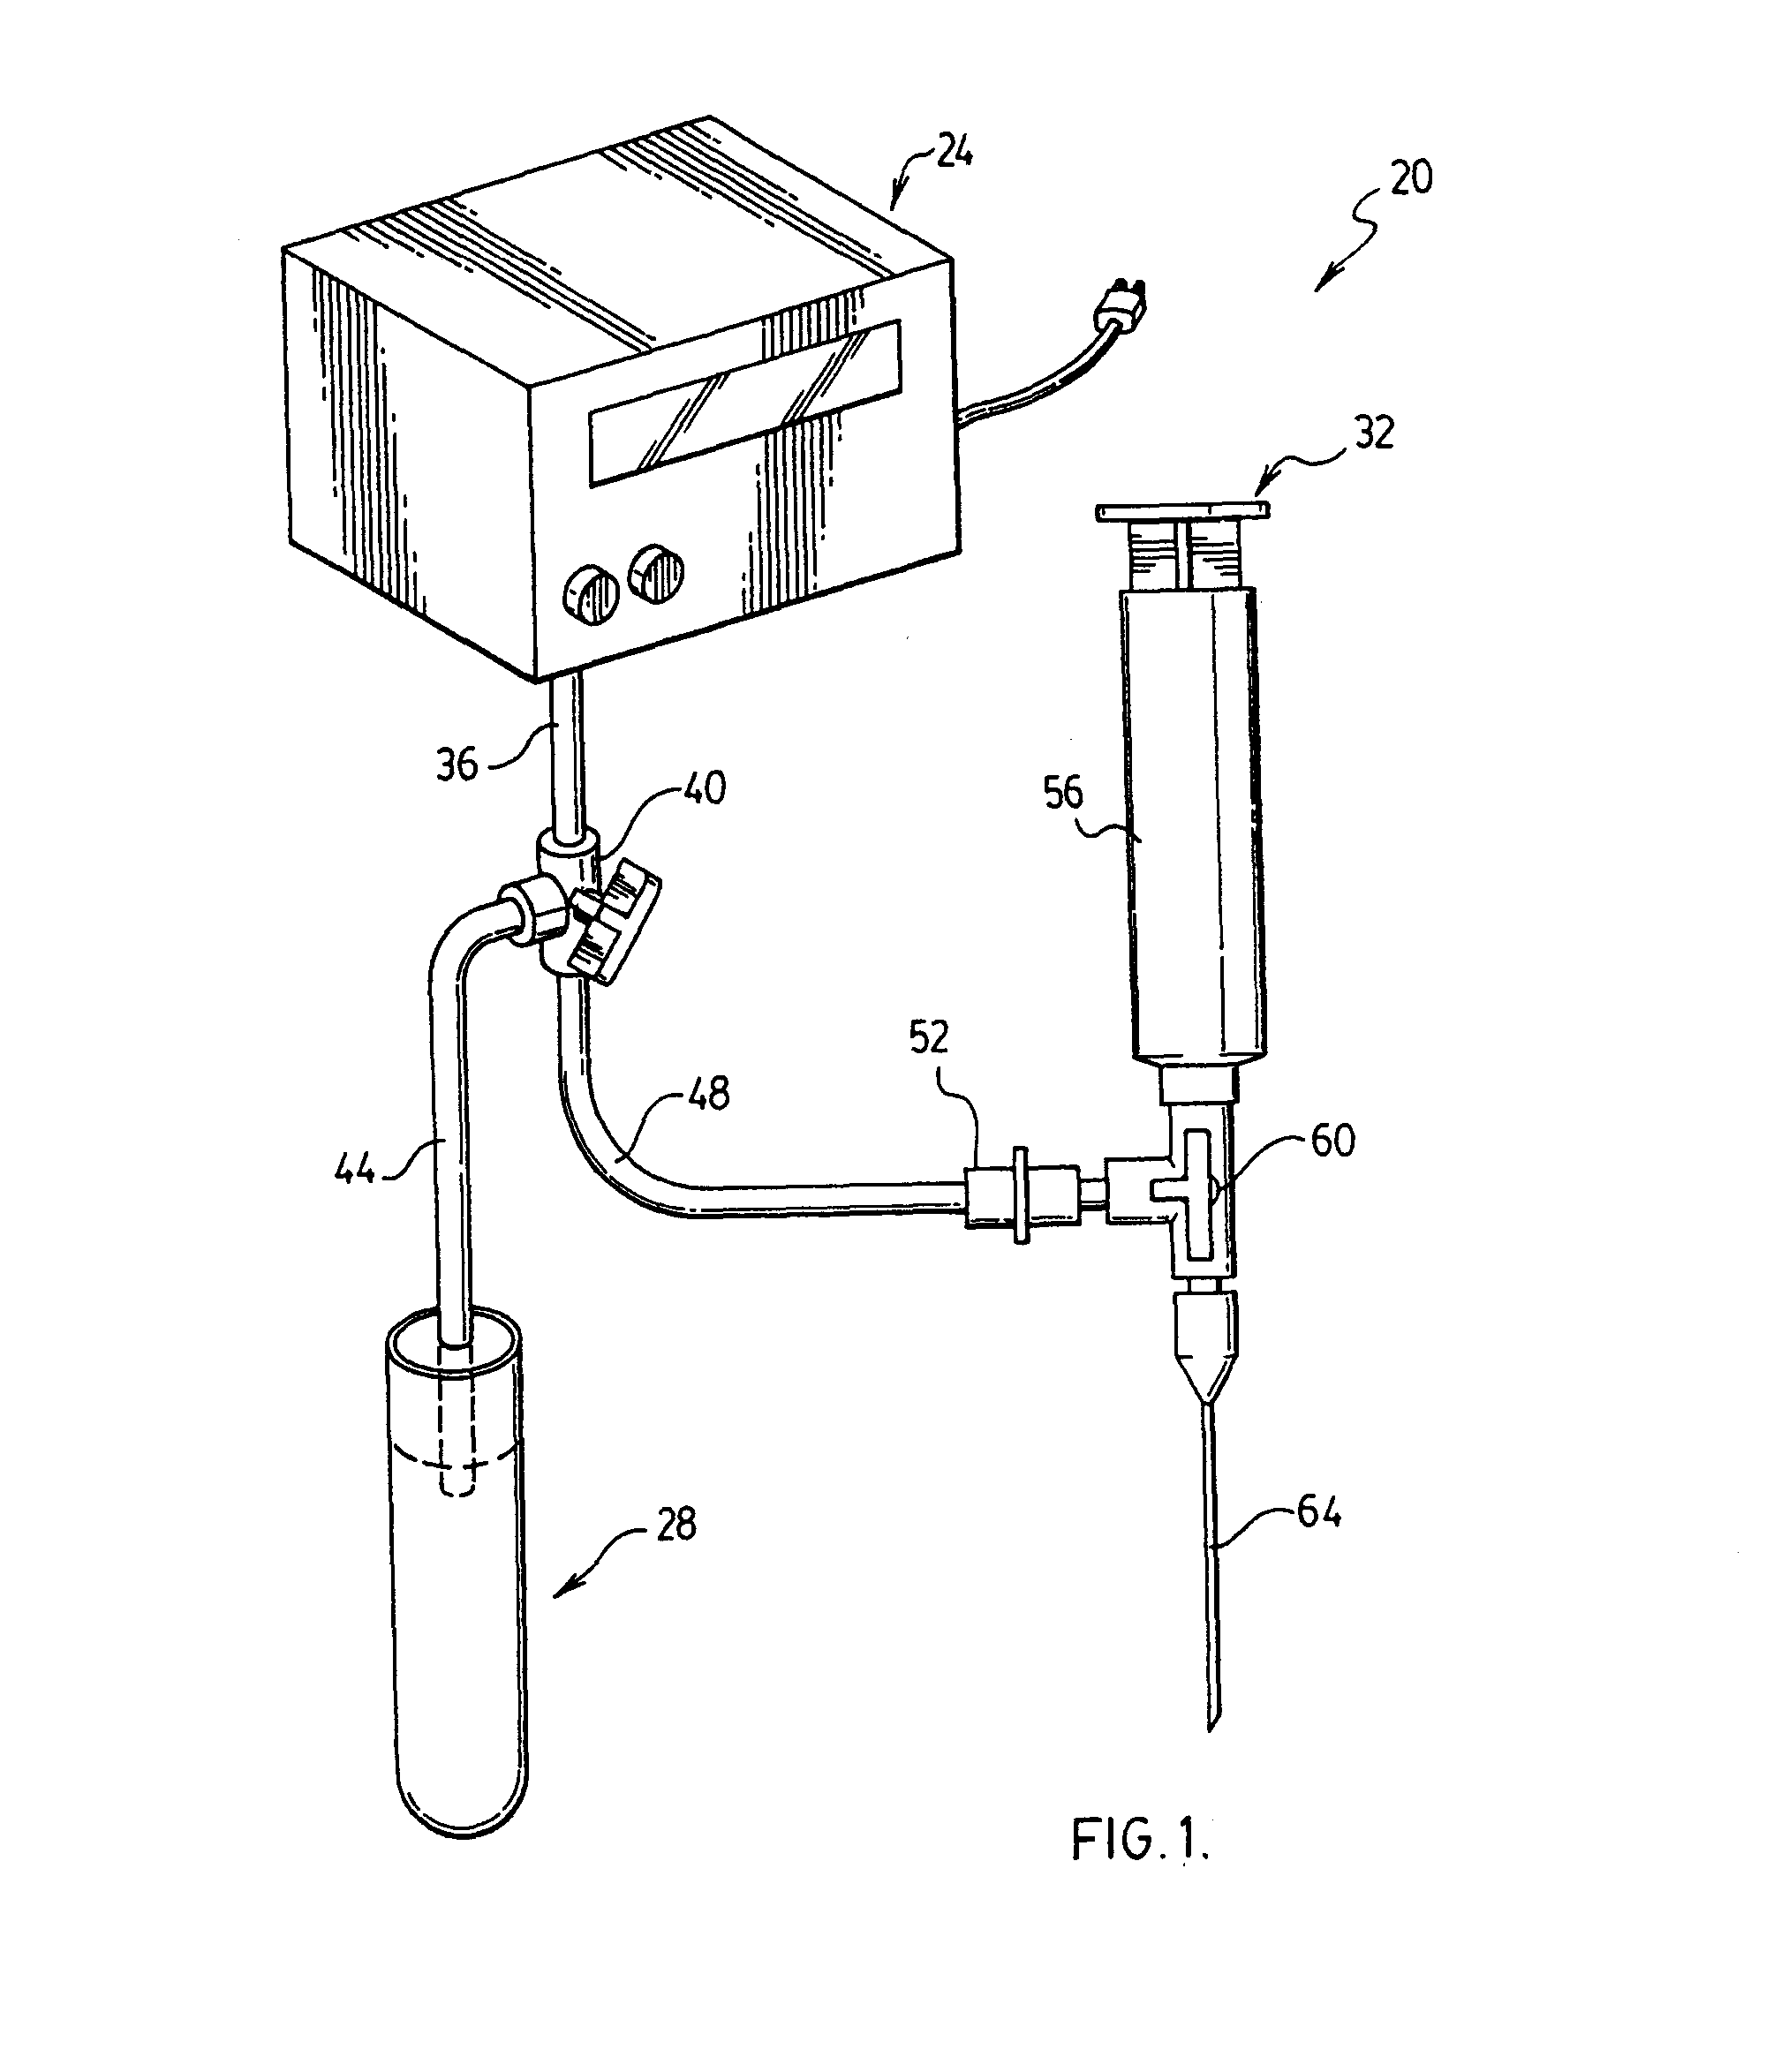 Method for administering a therapeutic agent into tissue